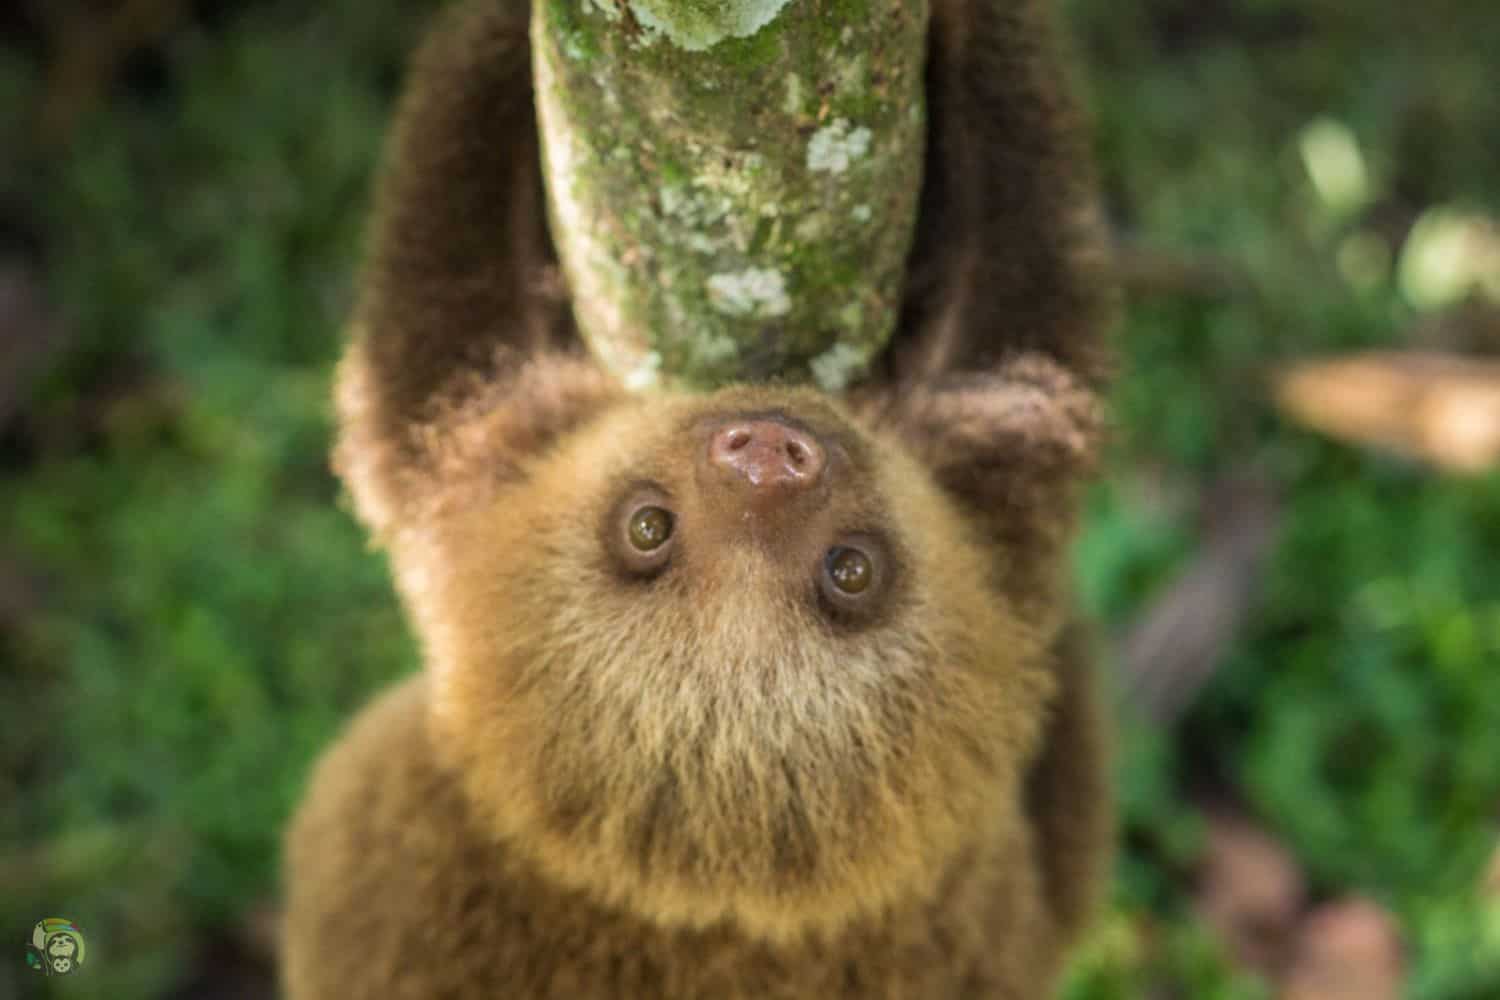 A sloth at Toucan Rescue Ranch in Costa Rica.